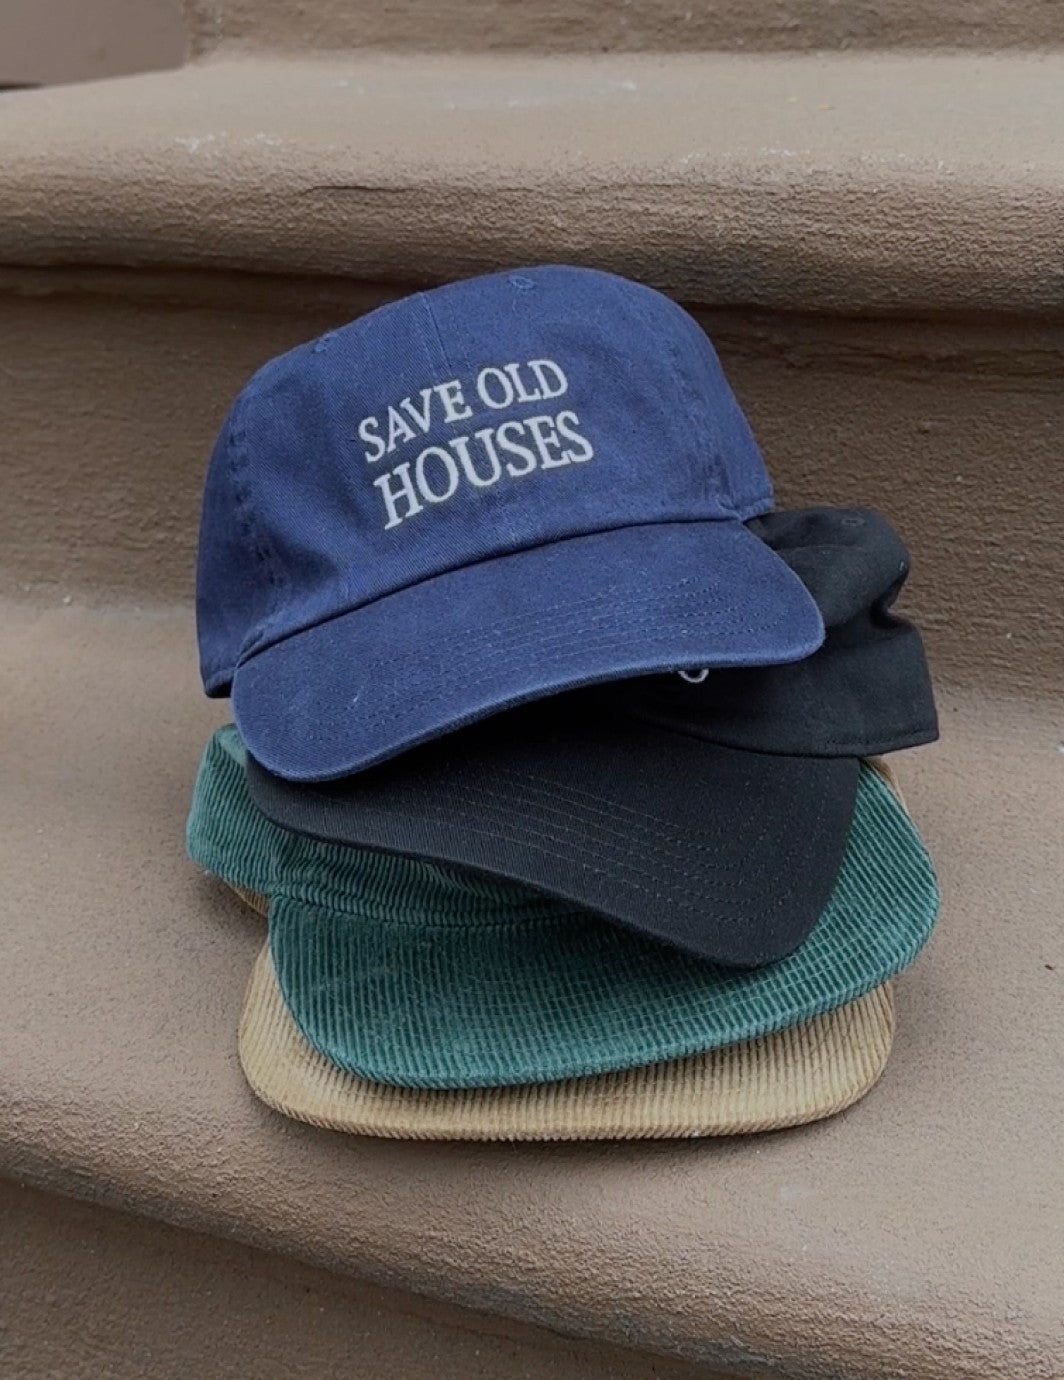 Brownstone Boys Save Old Houses hat